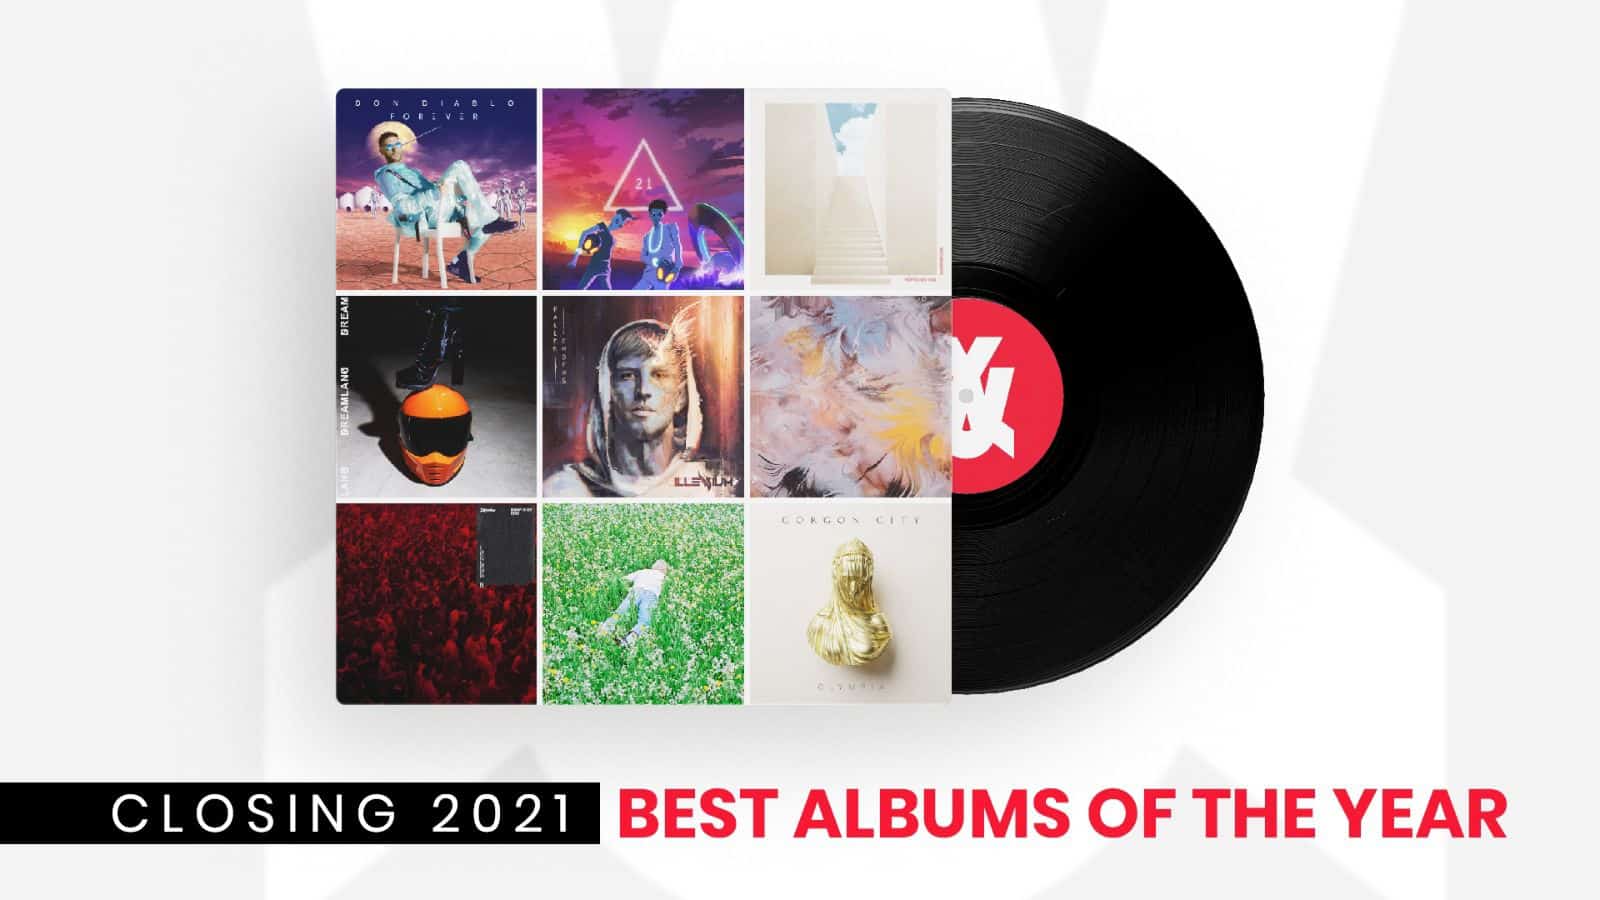 2021 in music: Looking back on some of the finest dance albums of the year